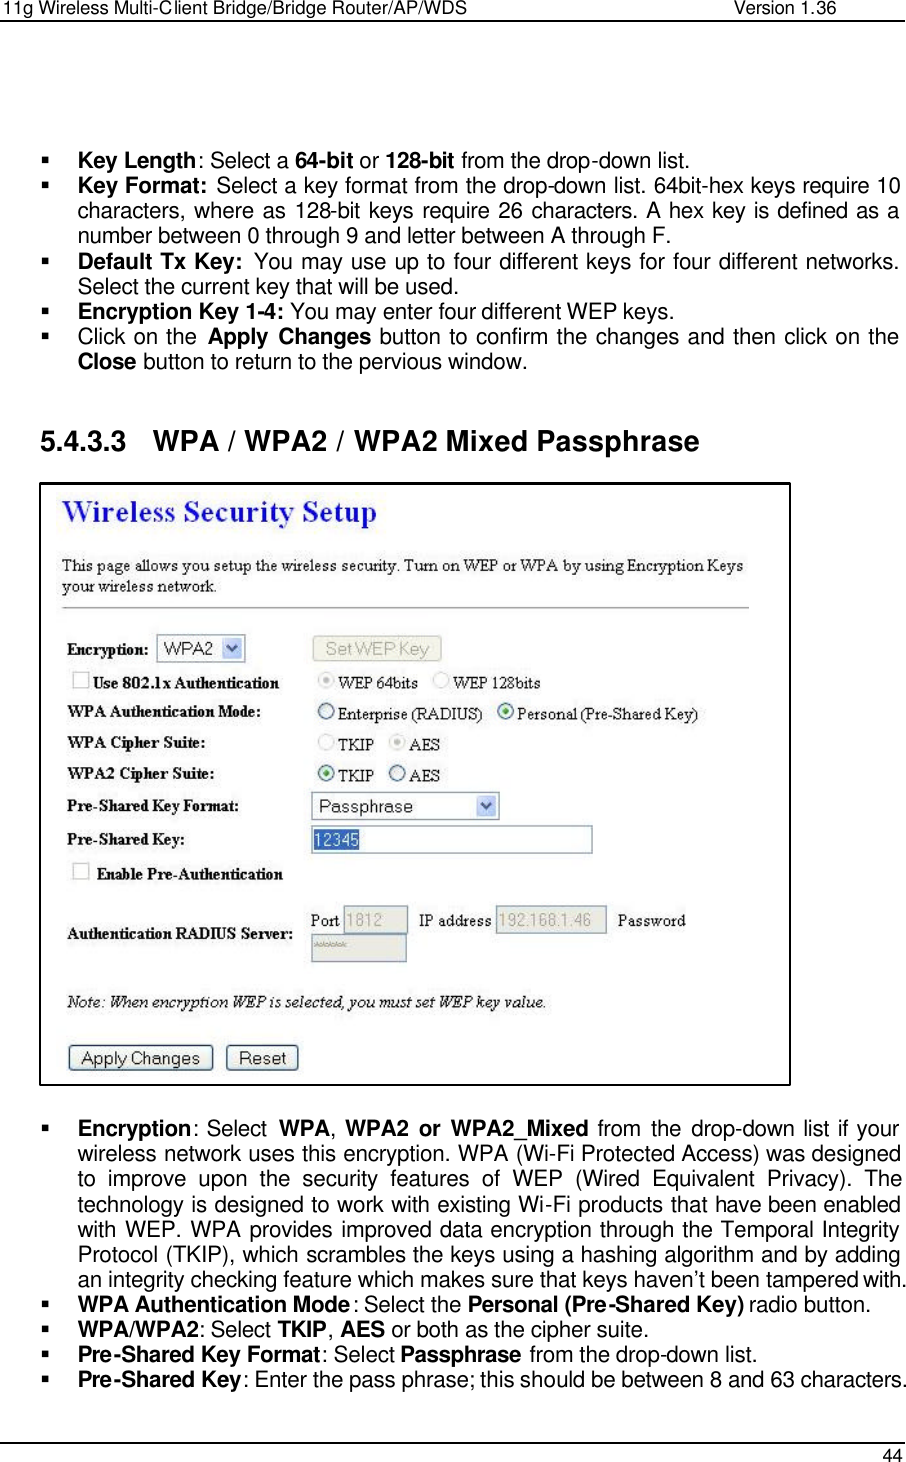 11g Wireless Multi-Client Bridge/Bridge Router/AP/WDS                                                   Version 1.36    44     § Key Length: Select a 64-bit or 128-bit from the drop-down list.  § Key Format: Select a key format from the drop-down list. 64bit-hex keys require 10 characters, where as 128-bit keys require 26 characters. A hex key is defined as a number between 0 through 9 and letter between A through F. § Default Tx Key:  You may use up to four different keys for four different networks. Select the current key that will be used.  § Encryption Key 1-4: You may enter four different WEP keys.  § Click on the Apply Changes button to confirm the changes and then click on the Close button to return to the pervious window.    5.4.3.3 WPA / WPA2 / WPA2 Mixed Passphrase                          § Encryption: Select  WPA,  WPA2 or WPA2_Mixed from the drop-down list if your wireless network uses this encryption. WPA (Wi-Fi Protected Access) was designed to improve upon the security features of WEP (Wired Equivalent Privacy). The technology is designed to work with existing Wi-Fi products that have been enabled with WEP. WPA provides improved data encryption through the Temporal Integrity Protocol (TKIP), which scrambles the keys using a hashing algorithm and by adding an integrity checking feature which makes sure that keys haven’t been tampered with.  § WPA Authentication Mode: Select the Personal (Pre-Shared Key) radio button.  § WPA/WPA2: Select TKIP, AES or both as the cipher suite.  § Pre-Shared Key Format: Select Passphrase from the drop-down list.  § Pre-Shared Key: Enter the pass phrase; this should be between 8 and 63 characters.   